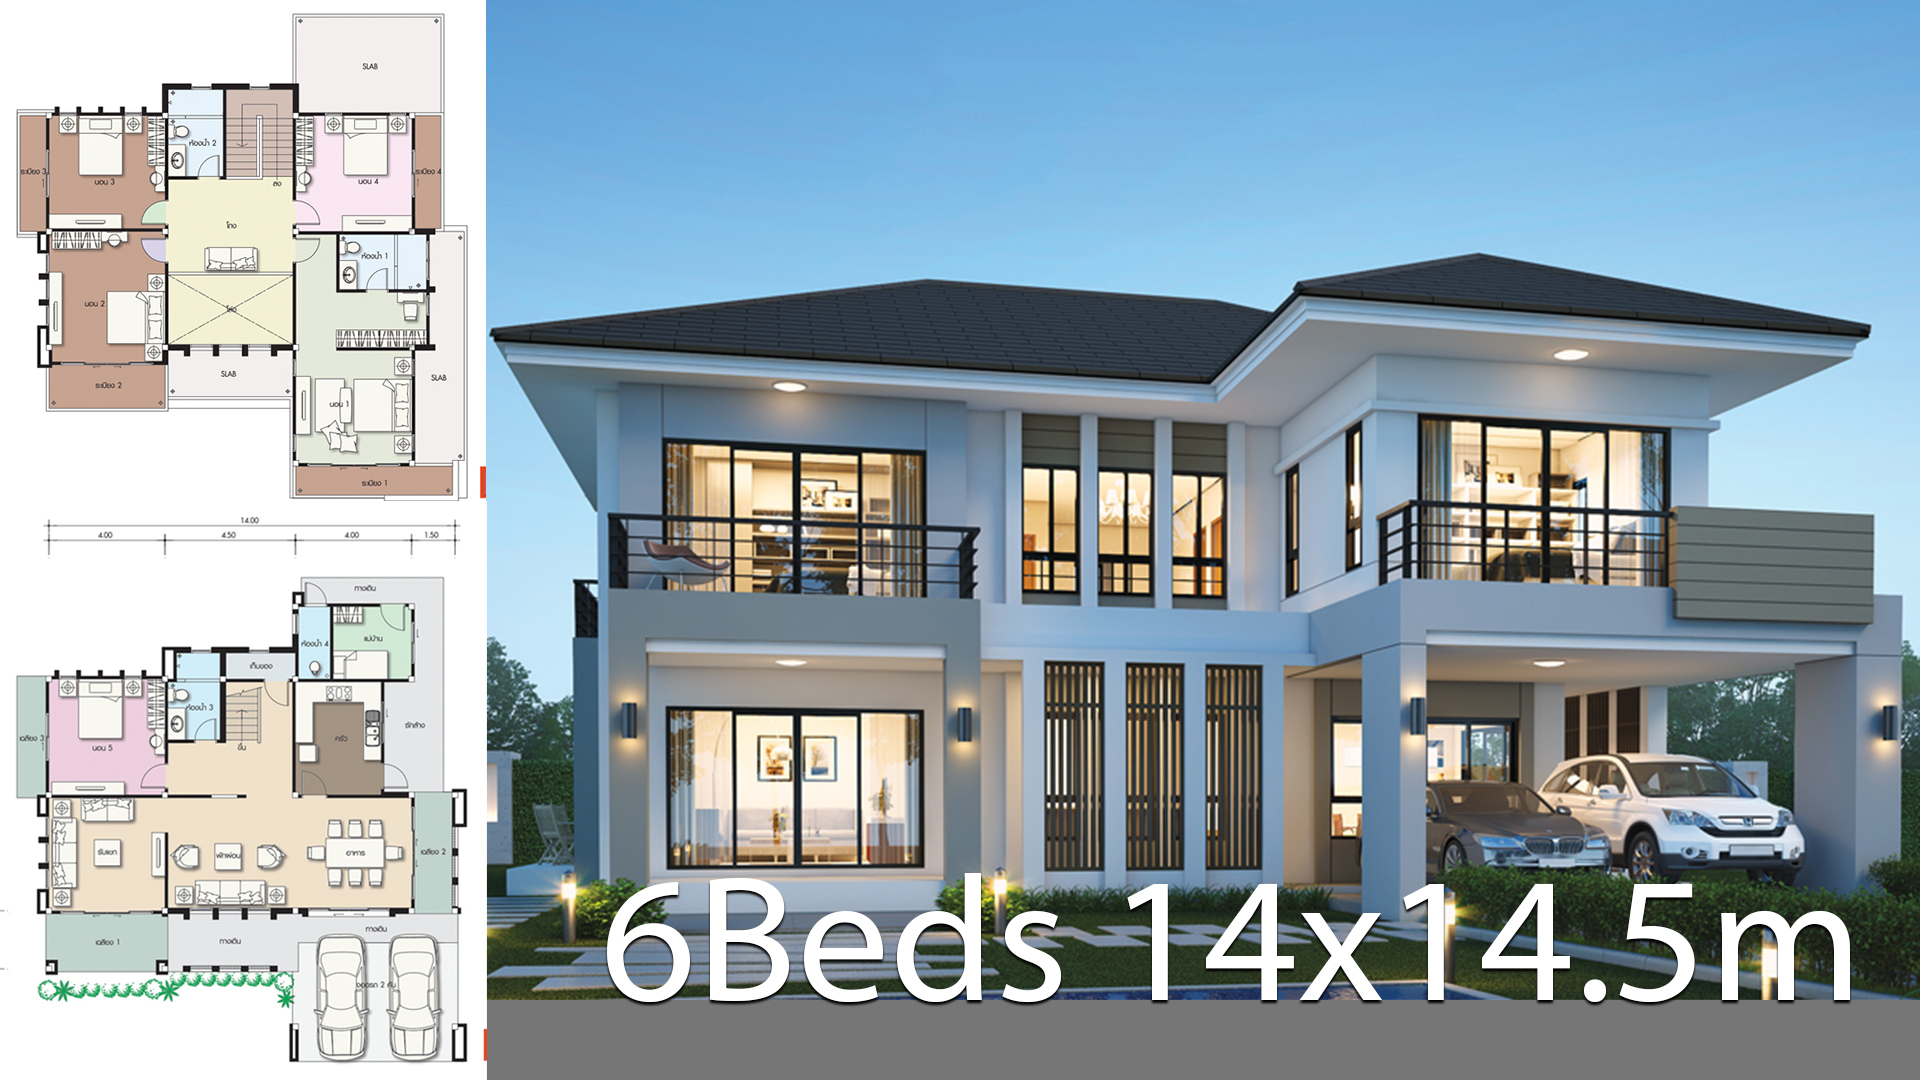 House design plan 14x14.5m with 6 bedrooms - House Plans 3D